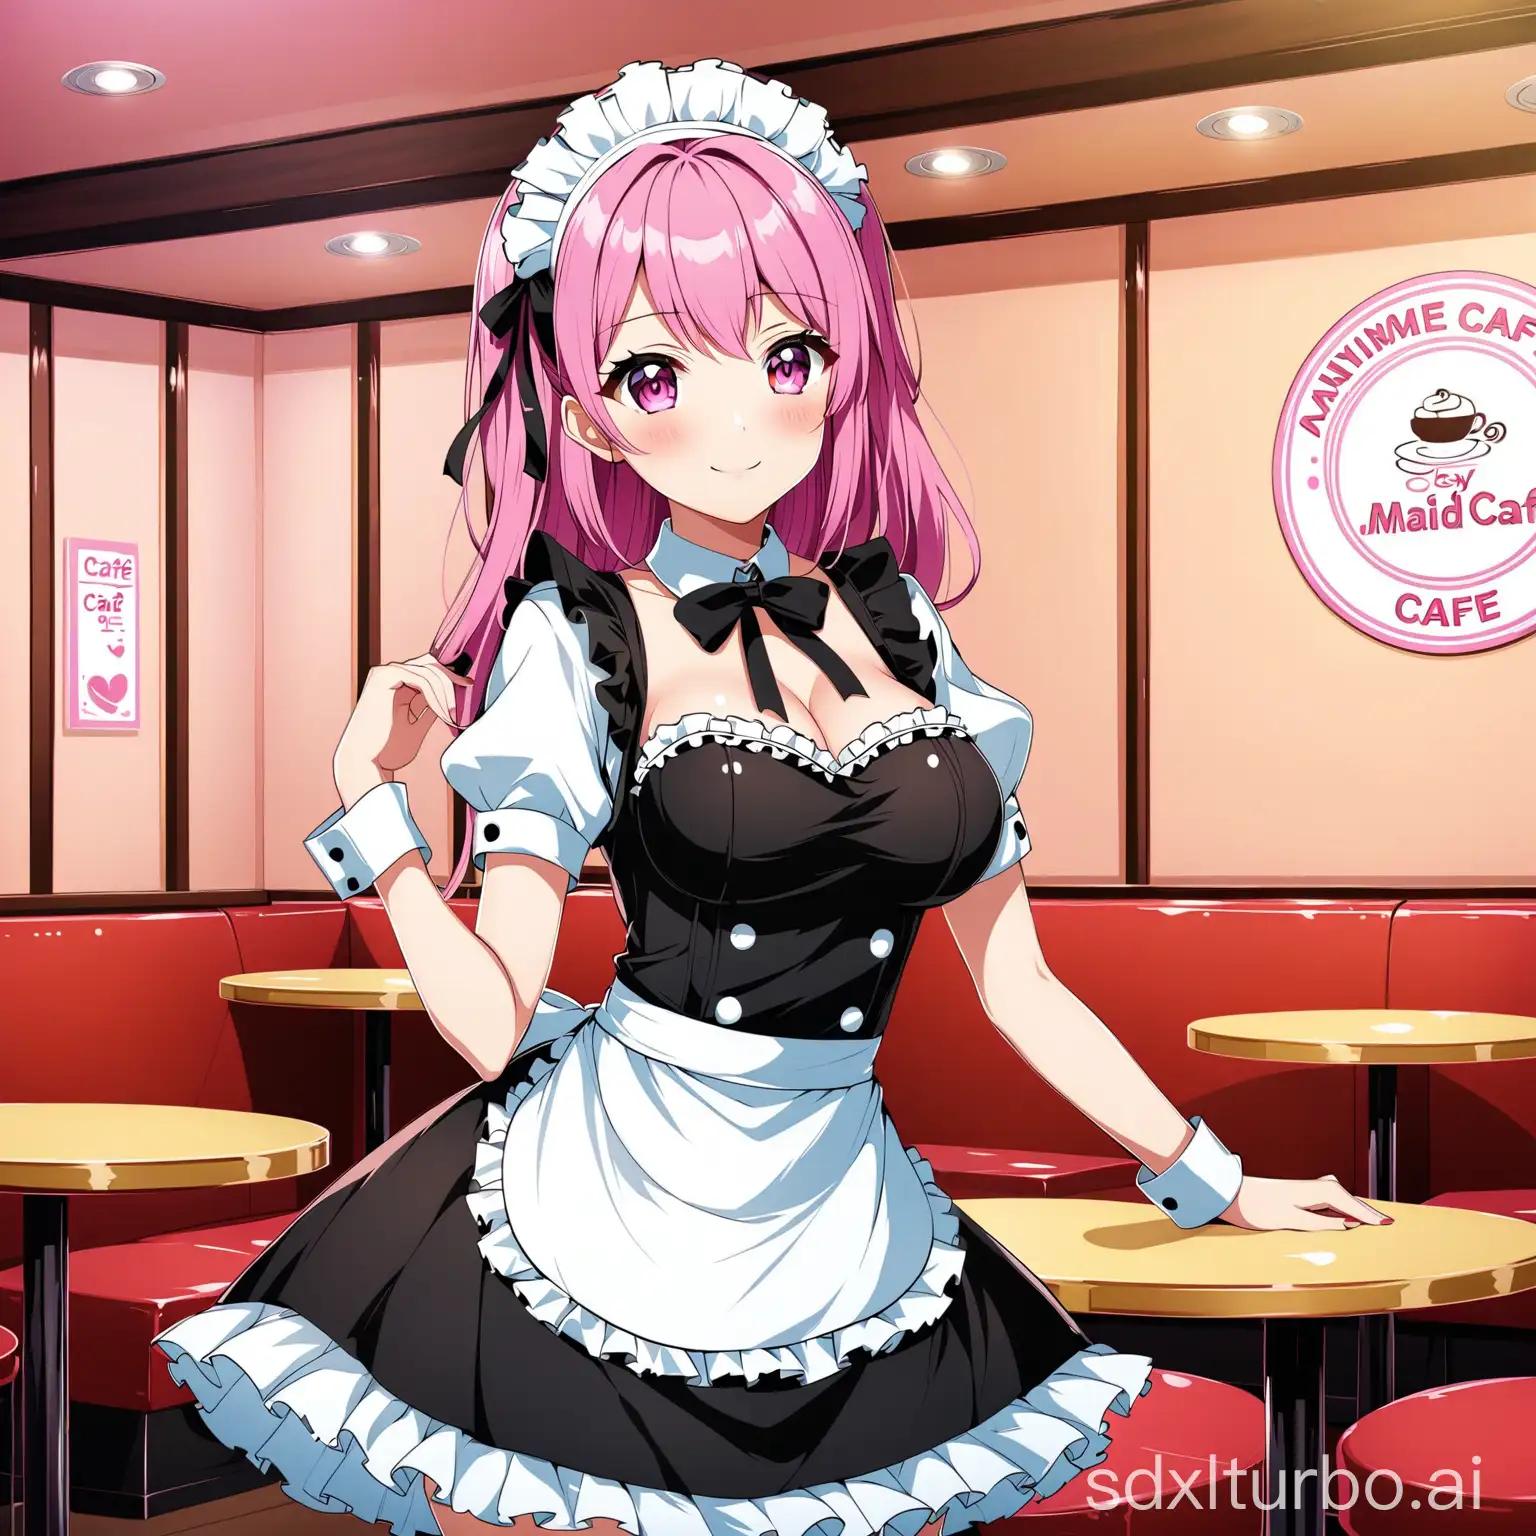 Elegant-Anime-Maid-Cafe-Background-with-Alluring-Atmosphere